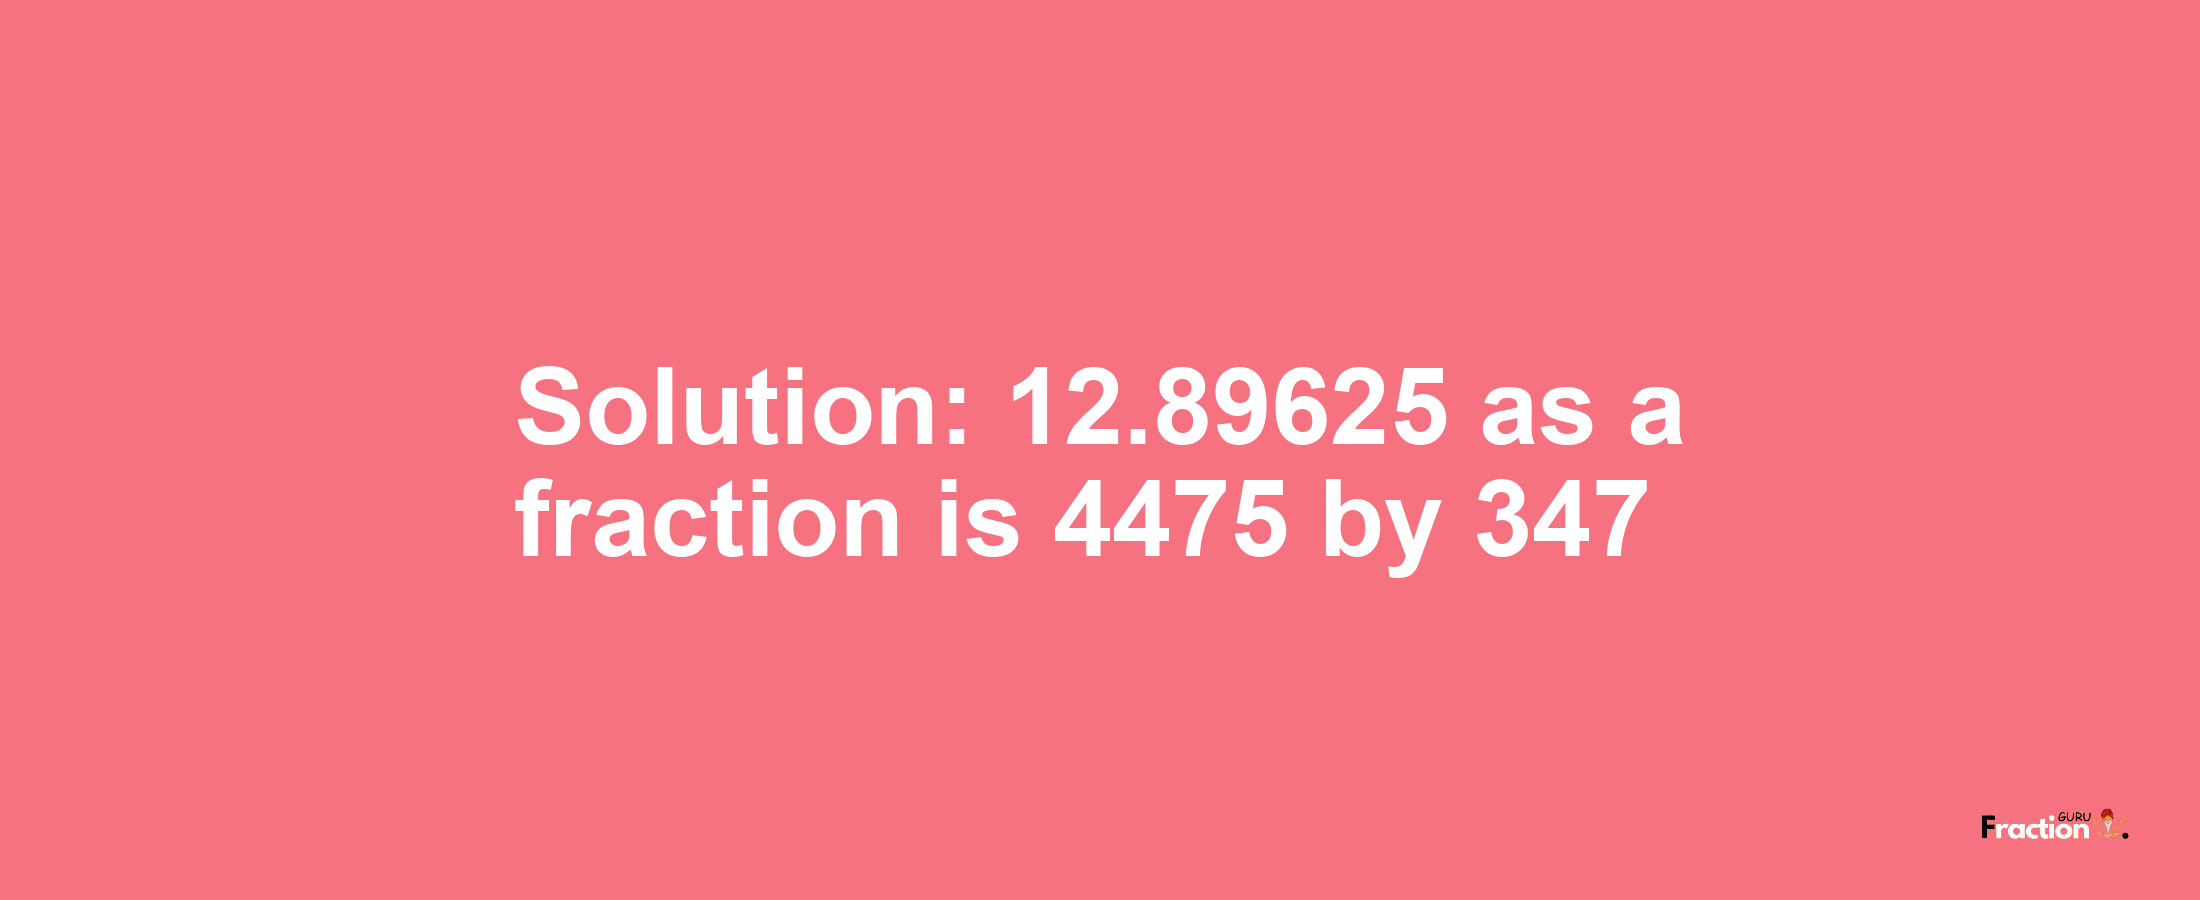 Solution:12.89625 as a fraction is 4475/347